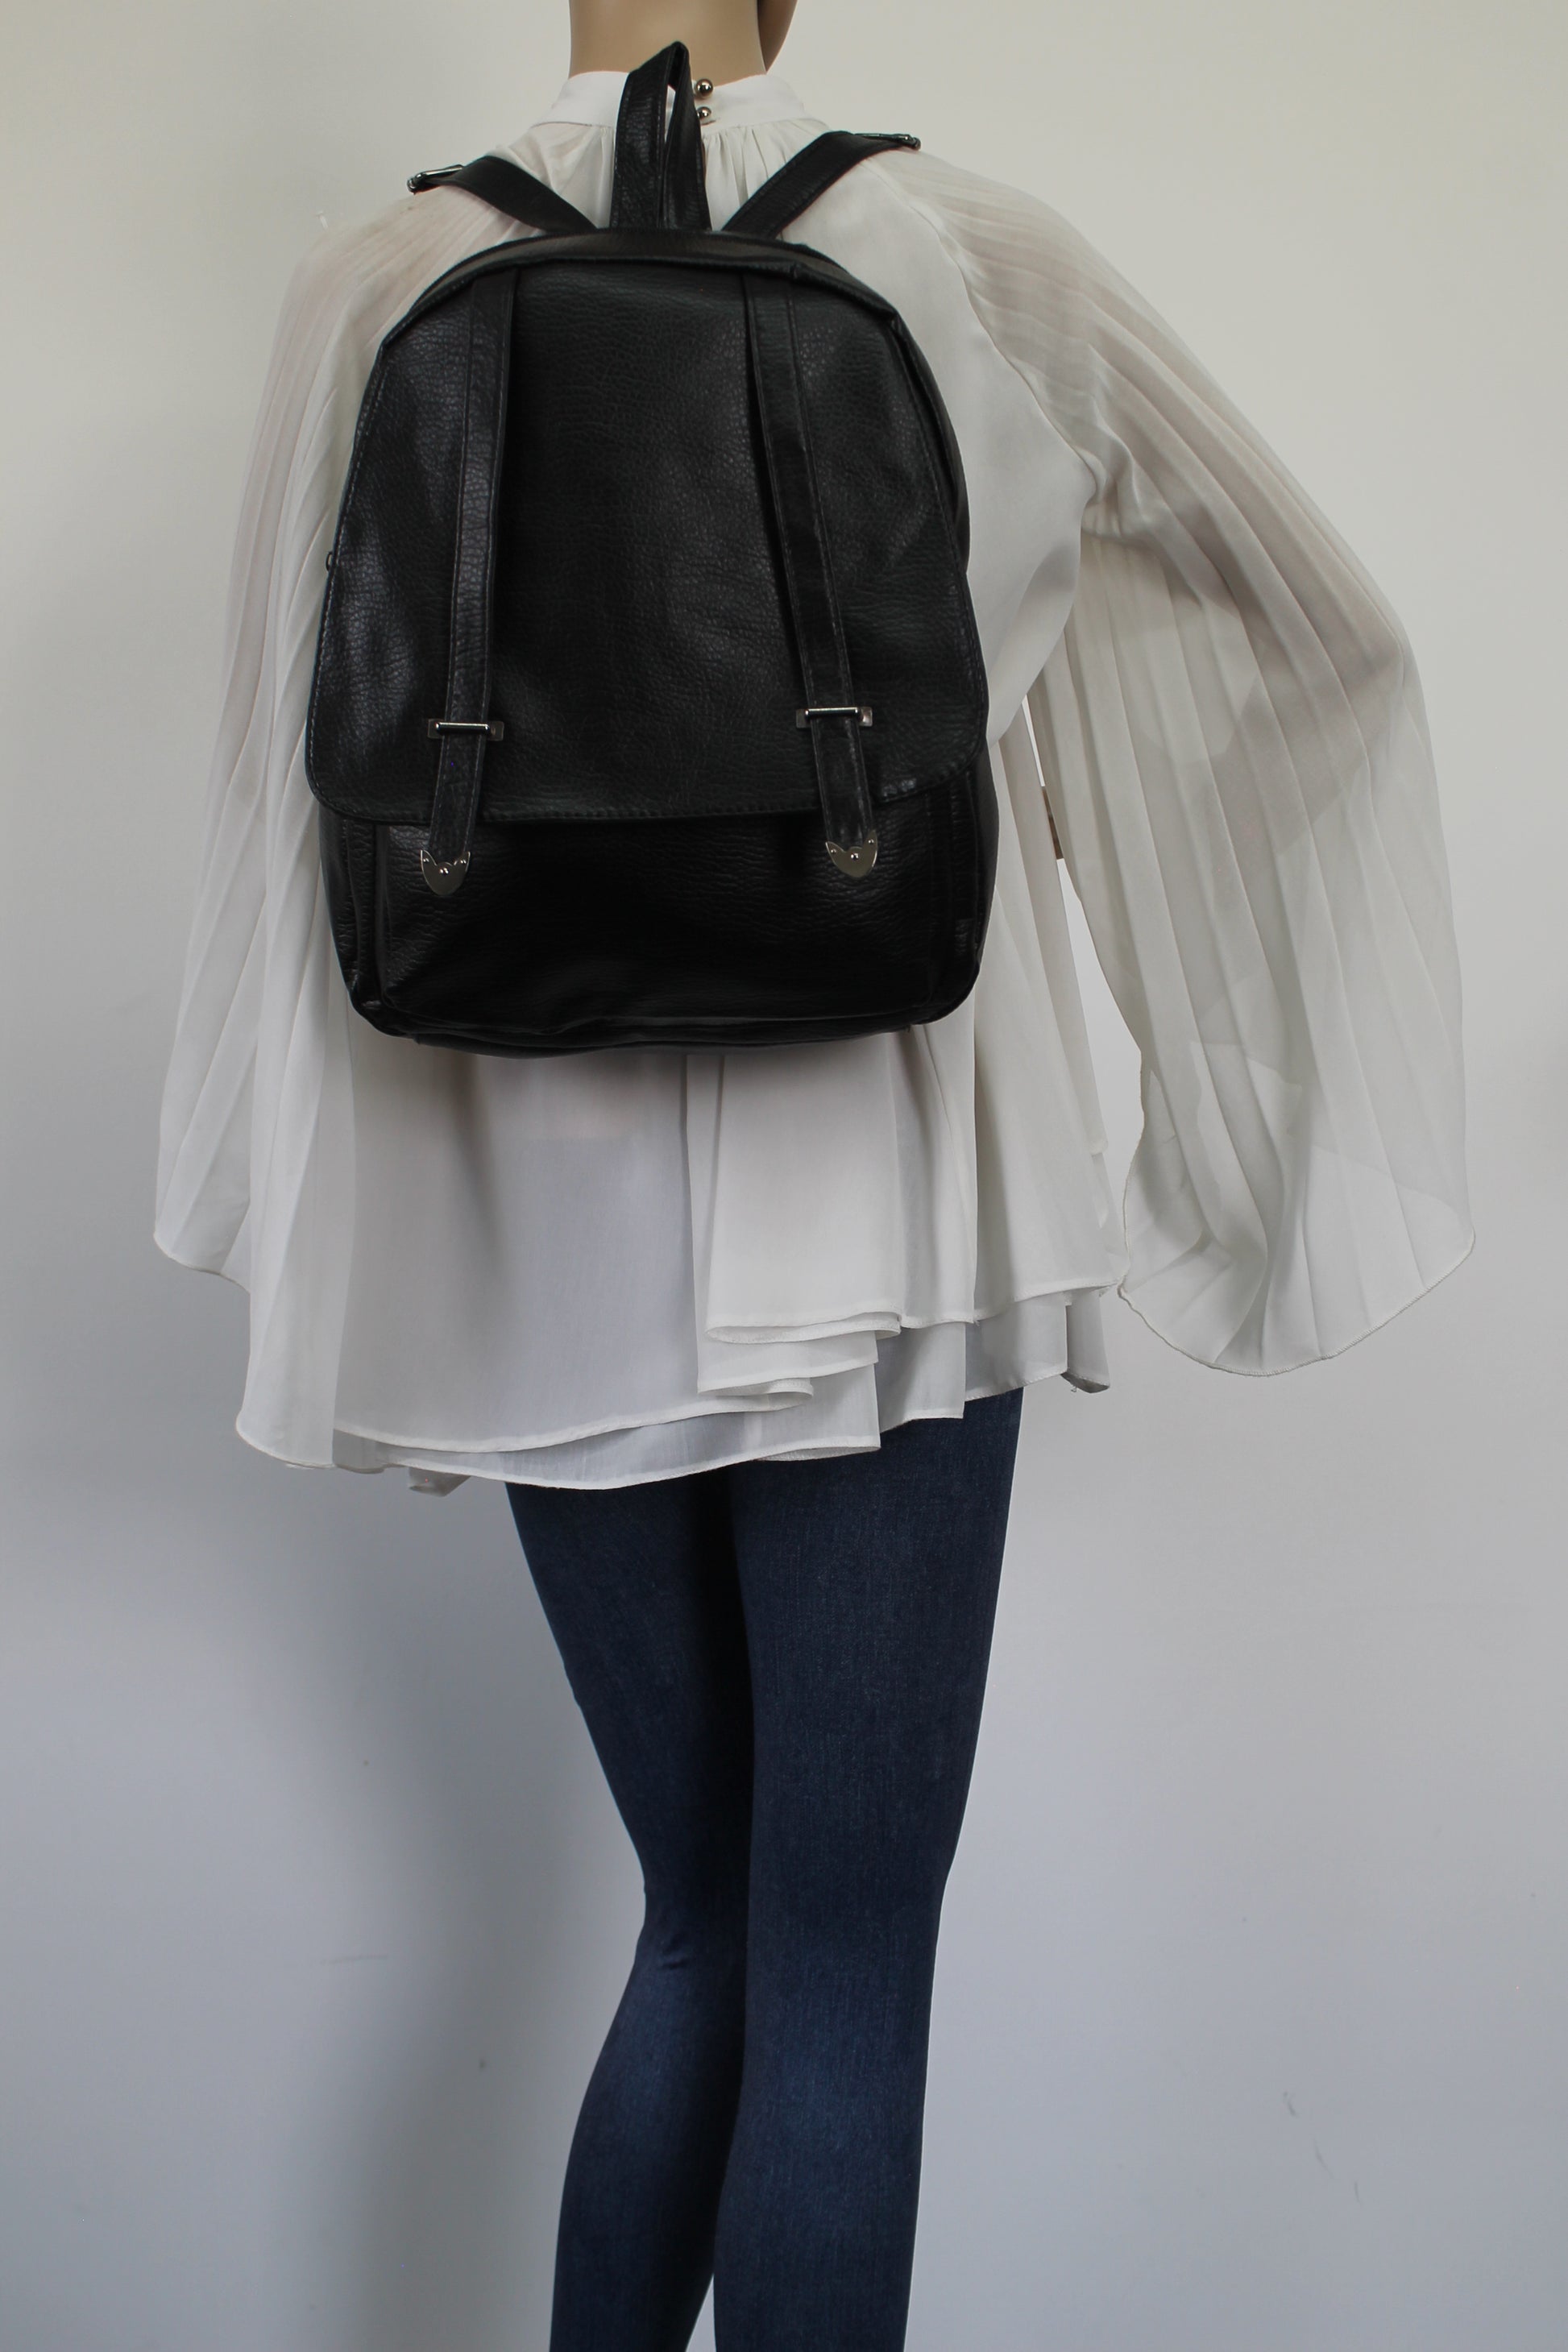 Swanky Swans Tiffany Backpack Black Perfect Backpack for school!